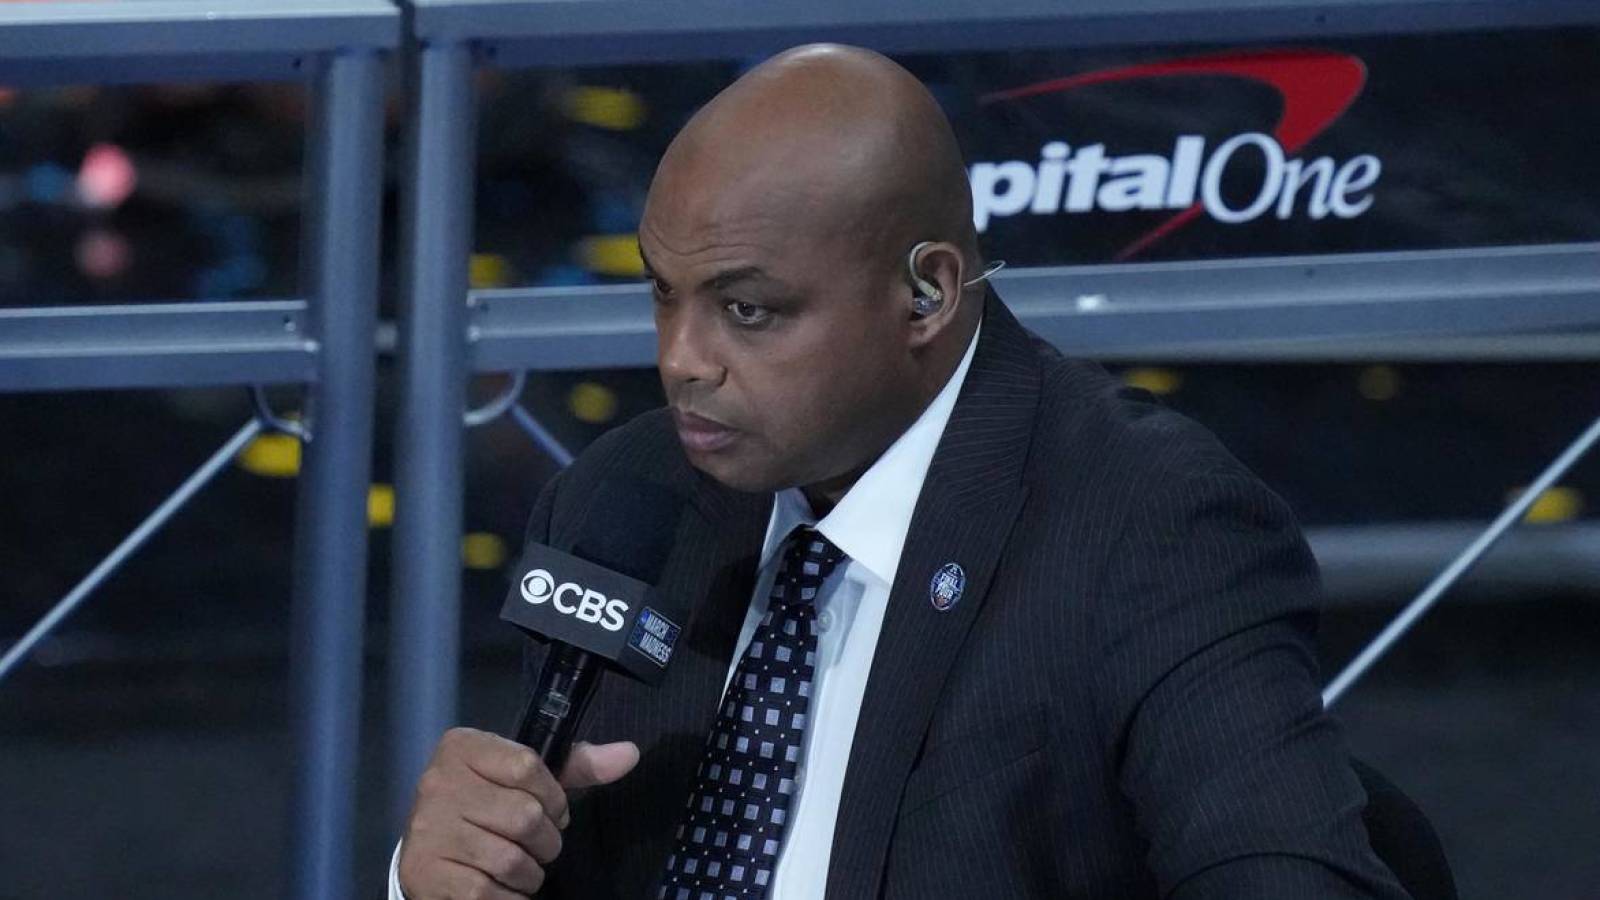 Charles Barkley says there was 'no chance' NBA would suspend LeBron James